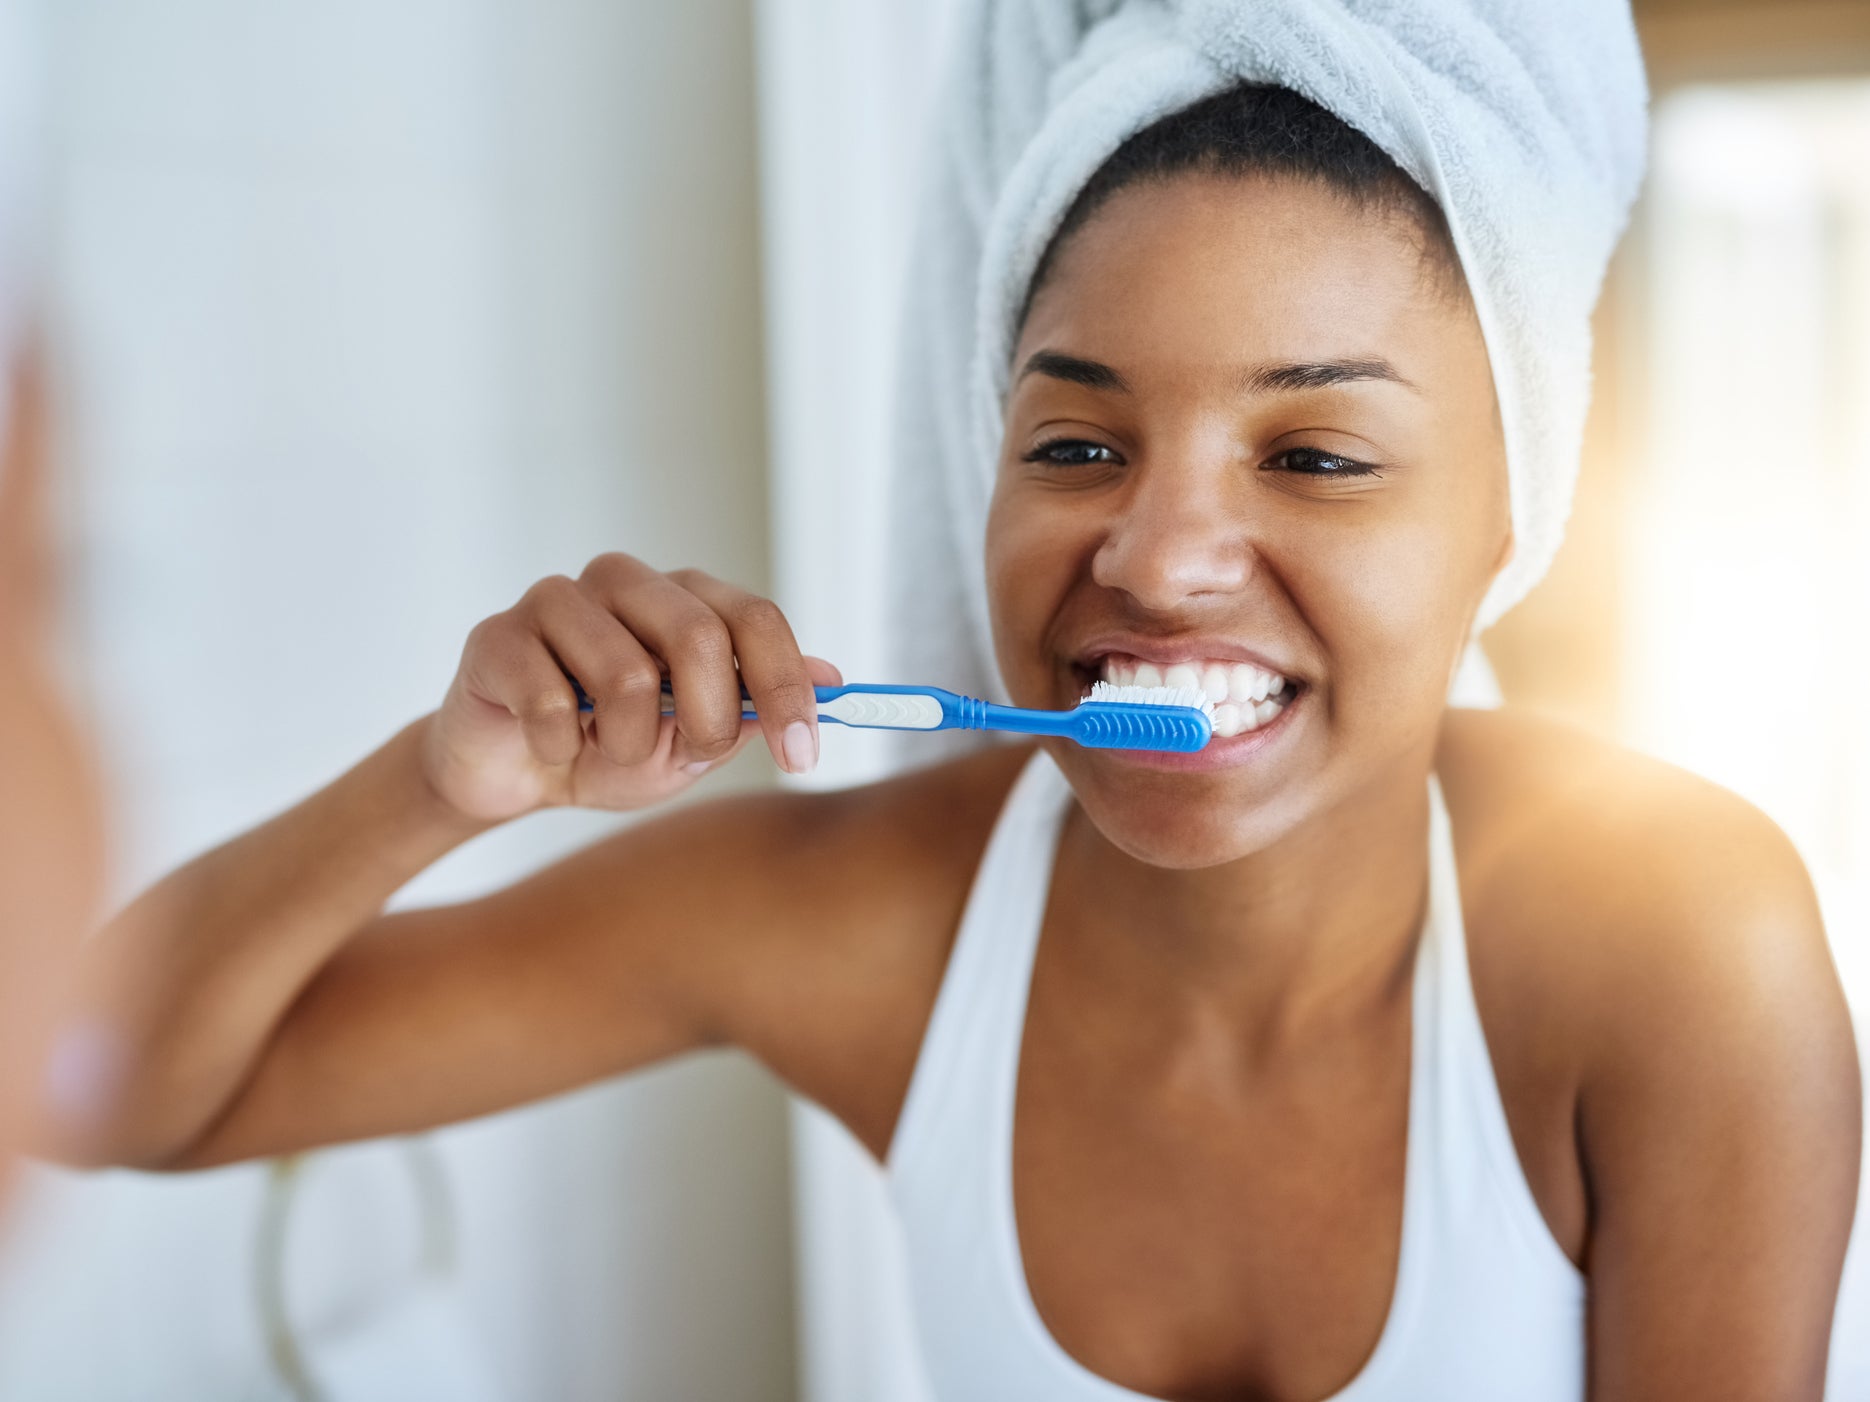 Brushing teeth three times a day could reduce risk of heart failure, study claims